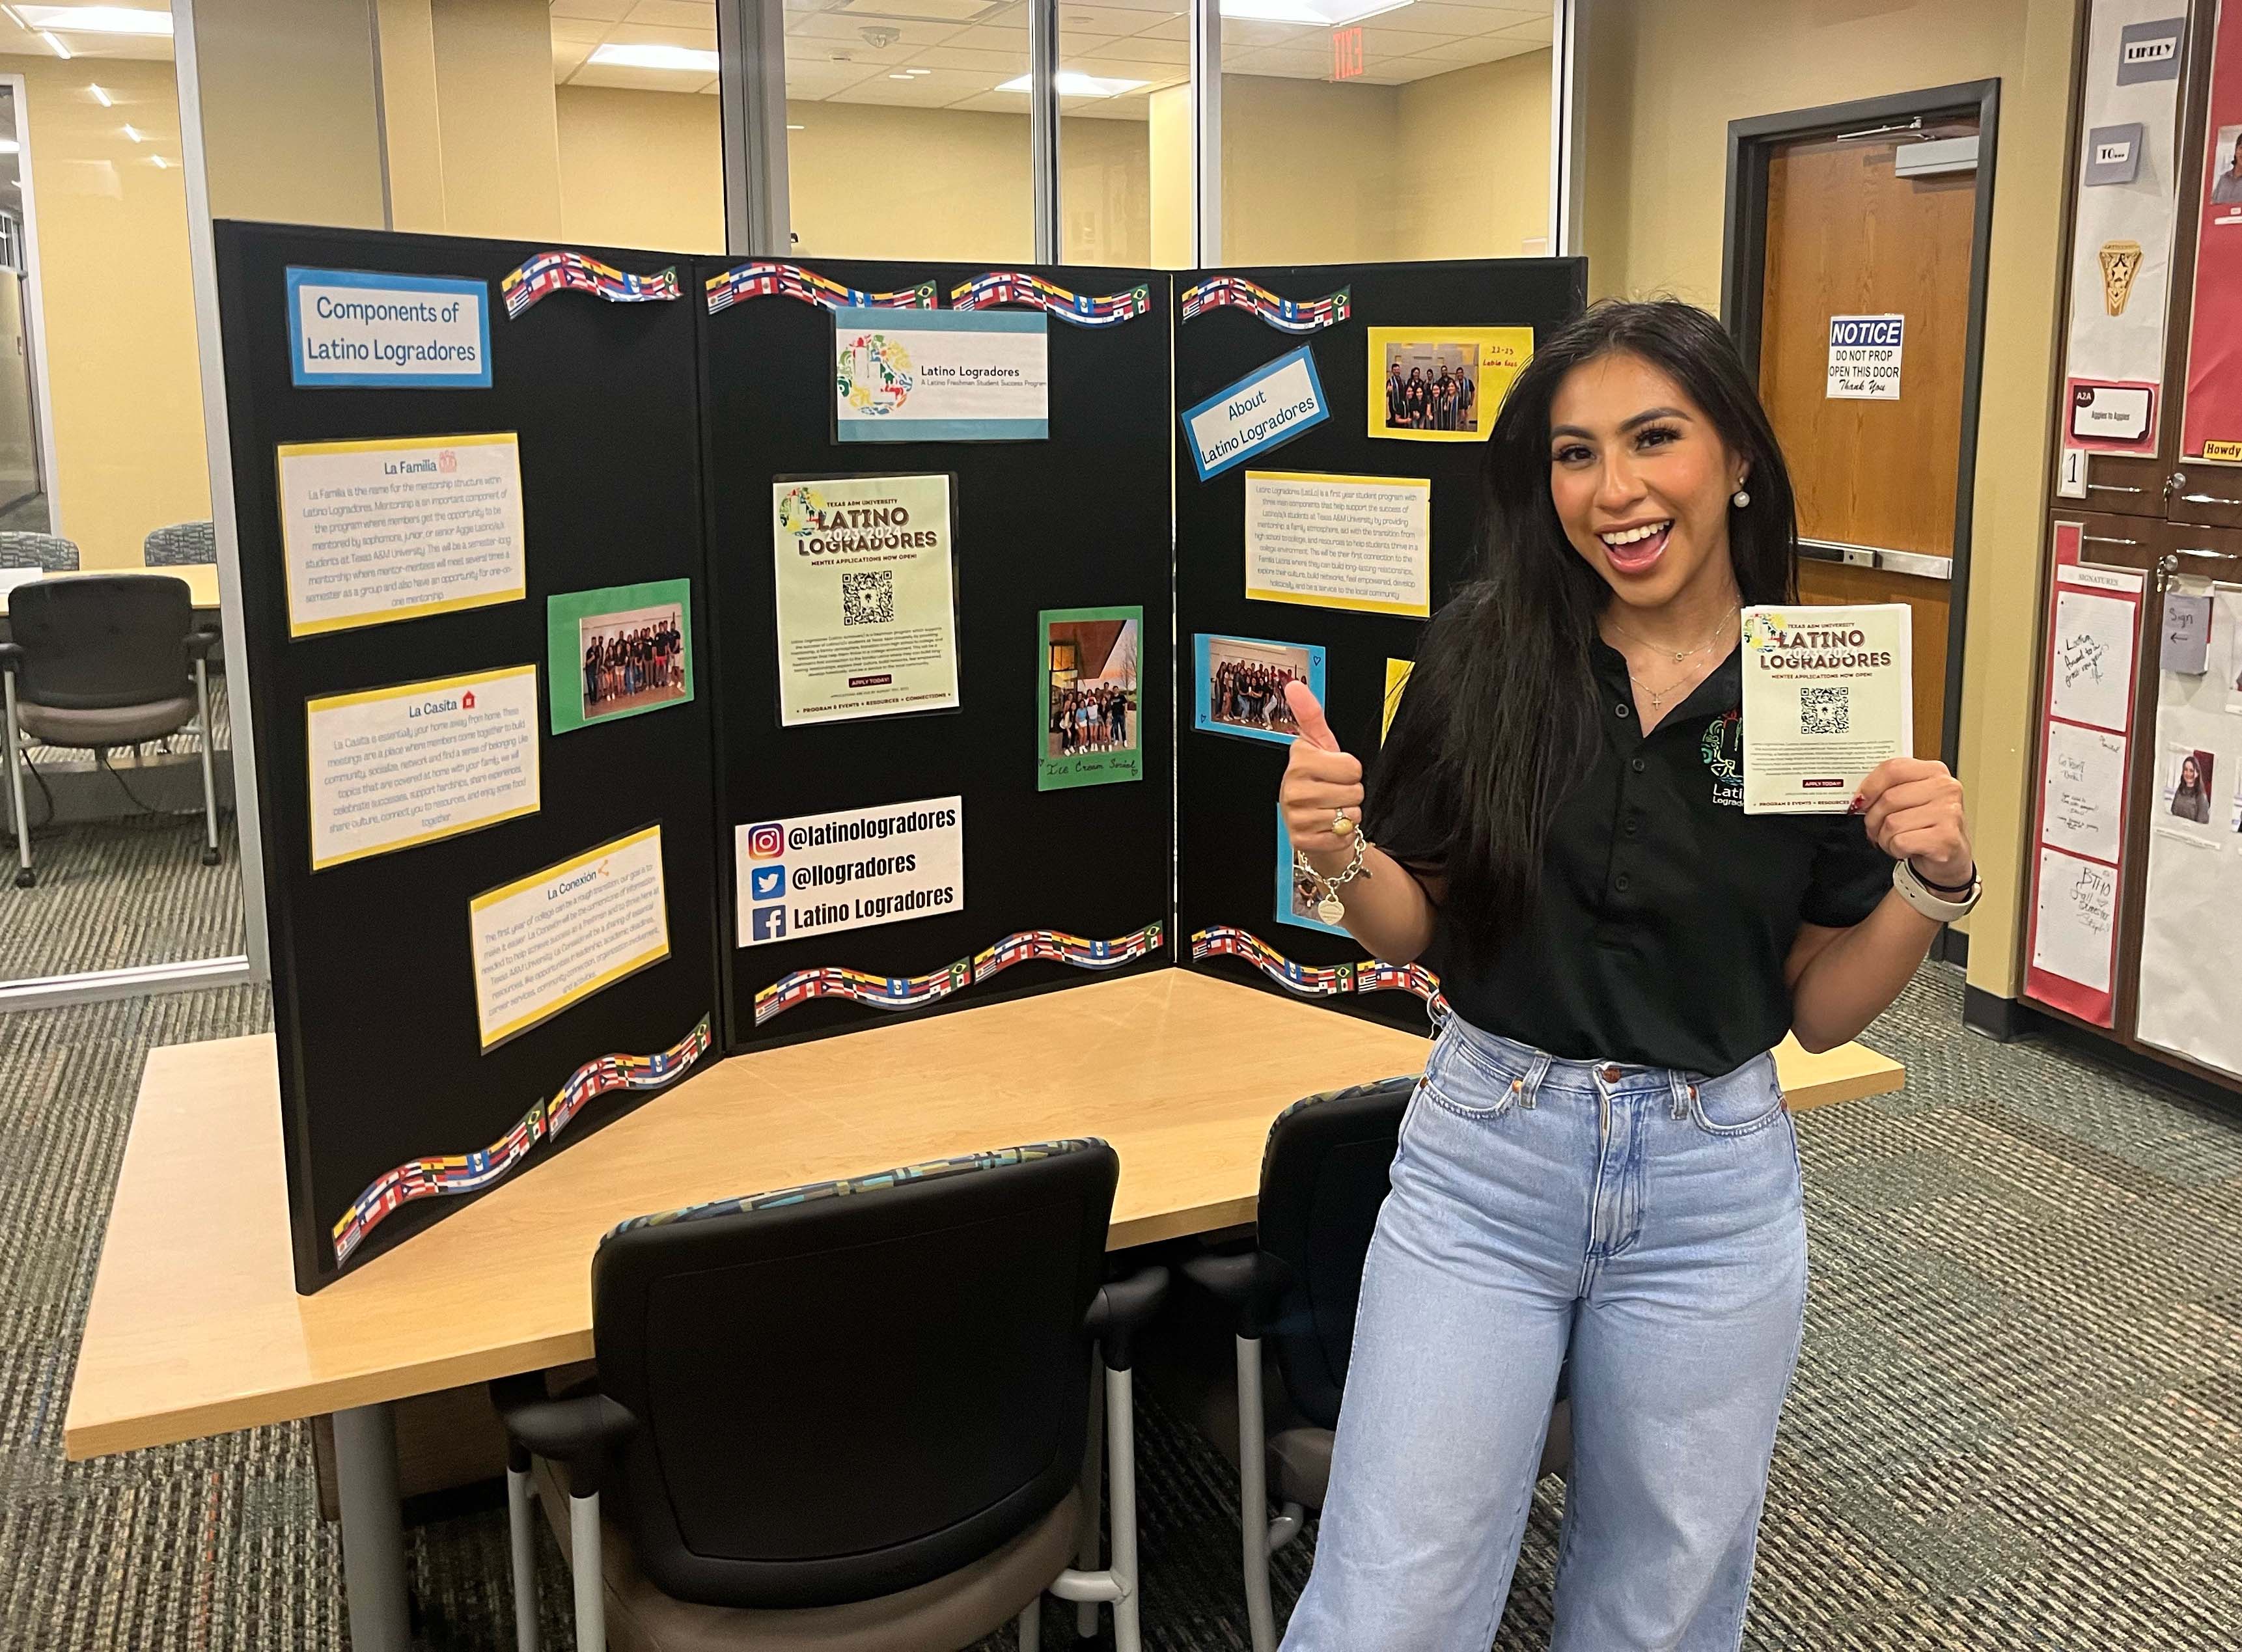 Texas A&amp;M women's and gender studies major Odyssey Olmos, standing by an exhibit for Latino Logradores in the Student Programs Office within the Memorial Student Center